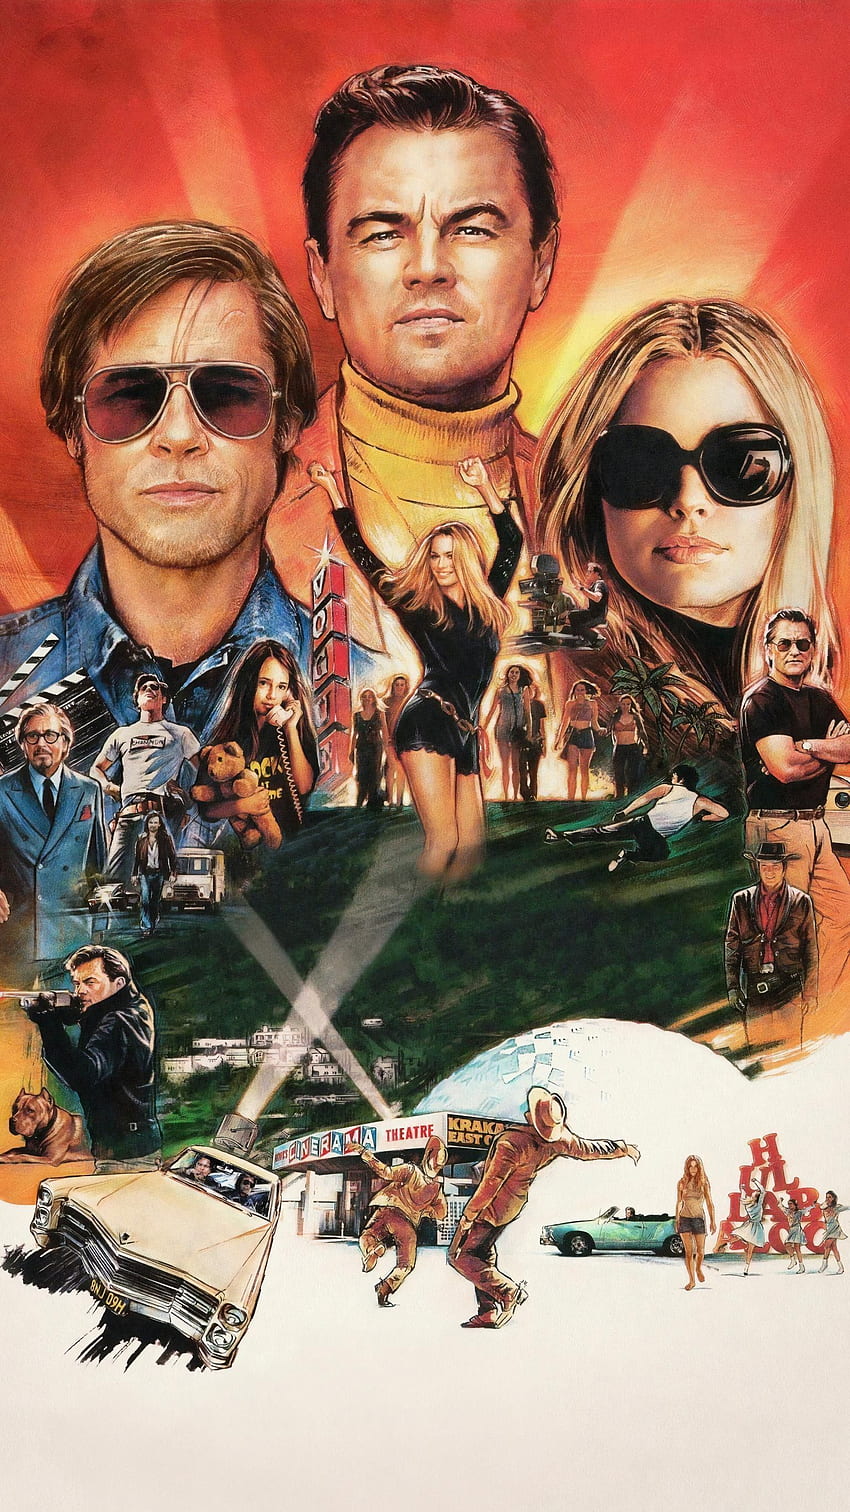 Once Upon a Time in Hollywood (2019) Phone . Moviemania. Film posters vintage, Quentin tarantino movies, Iconic movie posters, Hollywood Retro HD phone wallpaper